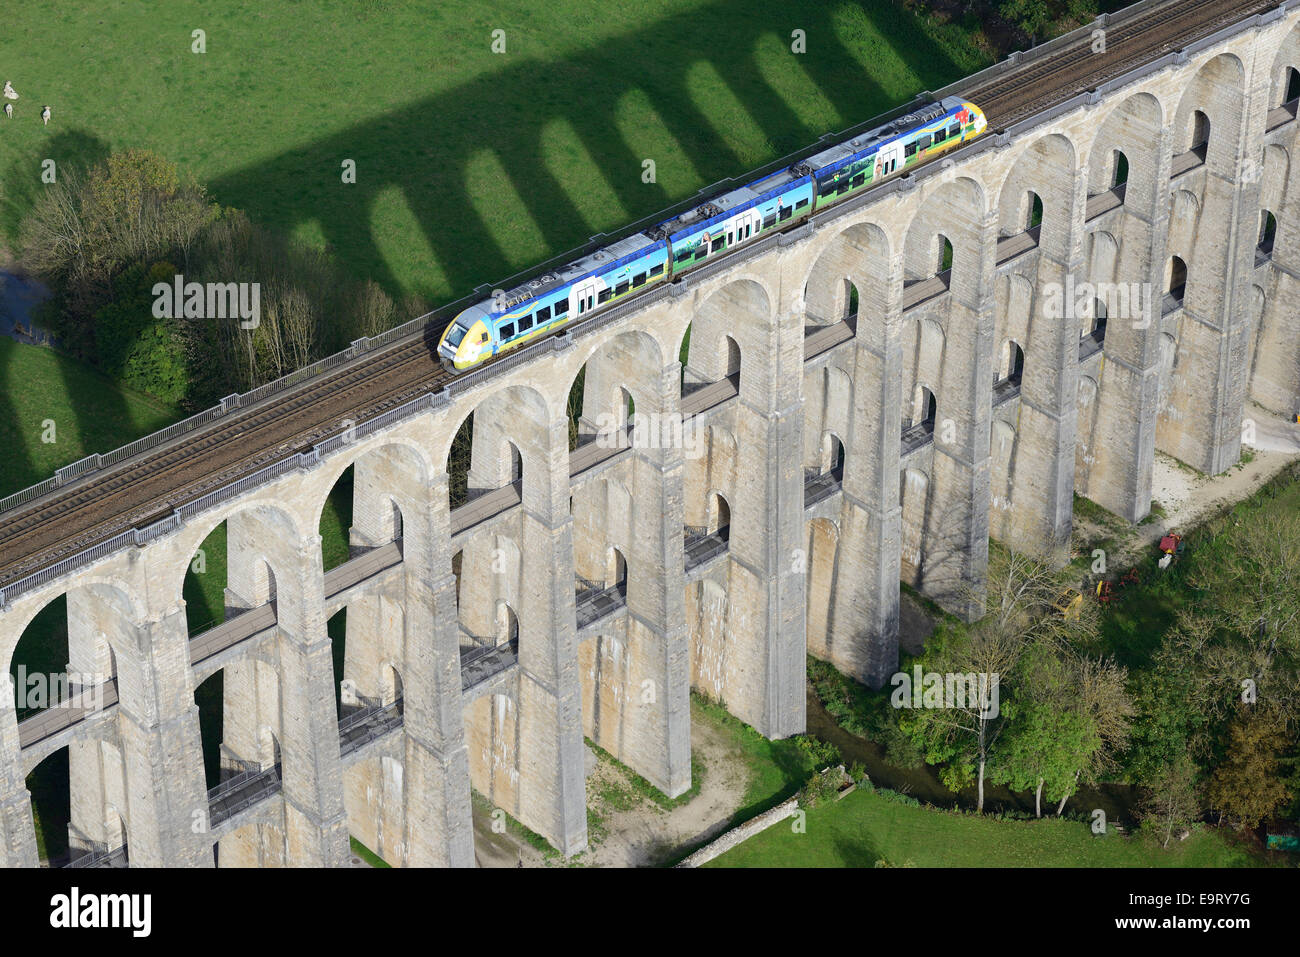 AERIAL VIEW. Commuter train on a historic (inaugurated in 1856) stone arch viaduct. Chaumont, Haute-Marne, Champagne-Ardenne, Grand Est, France. Stock Photo